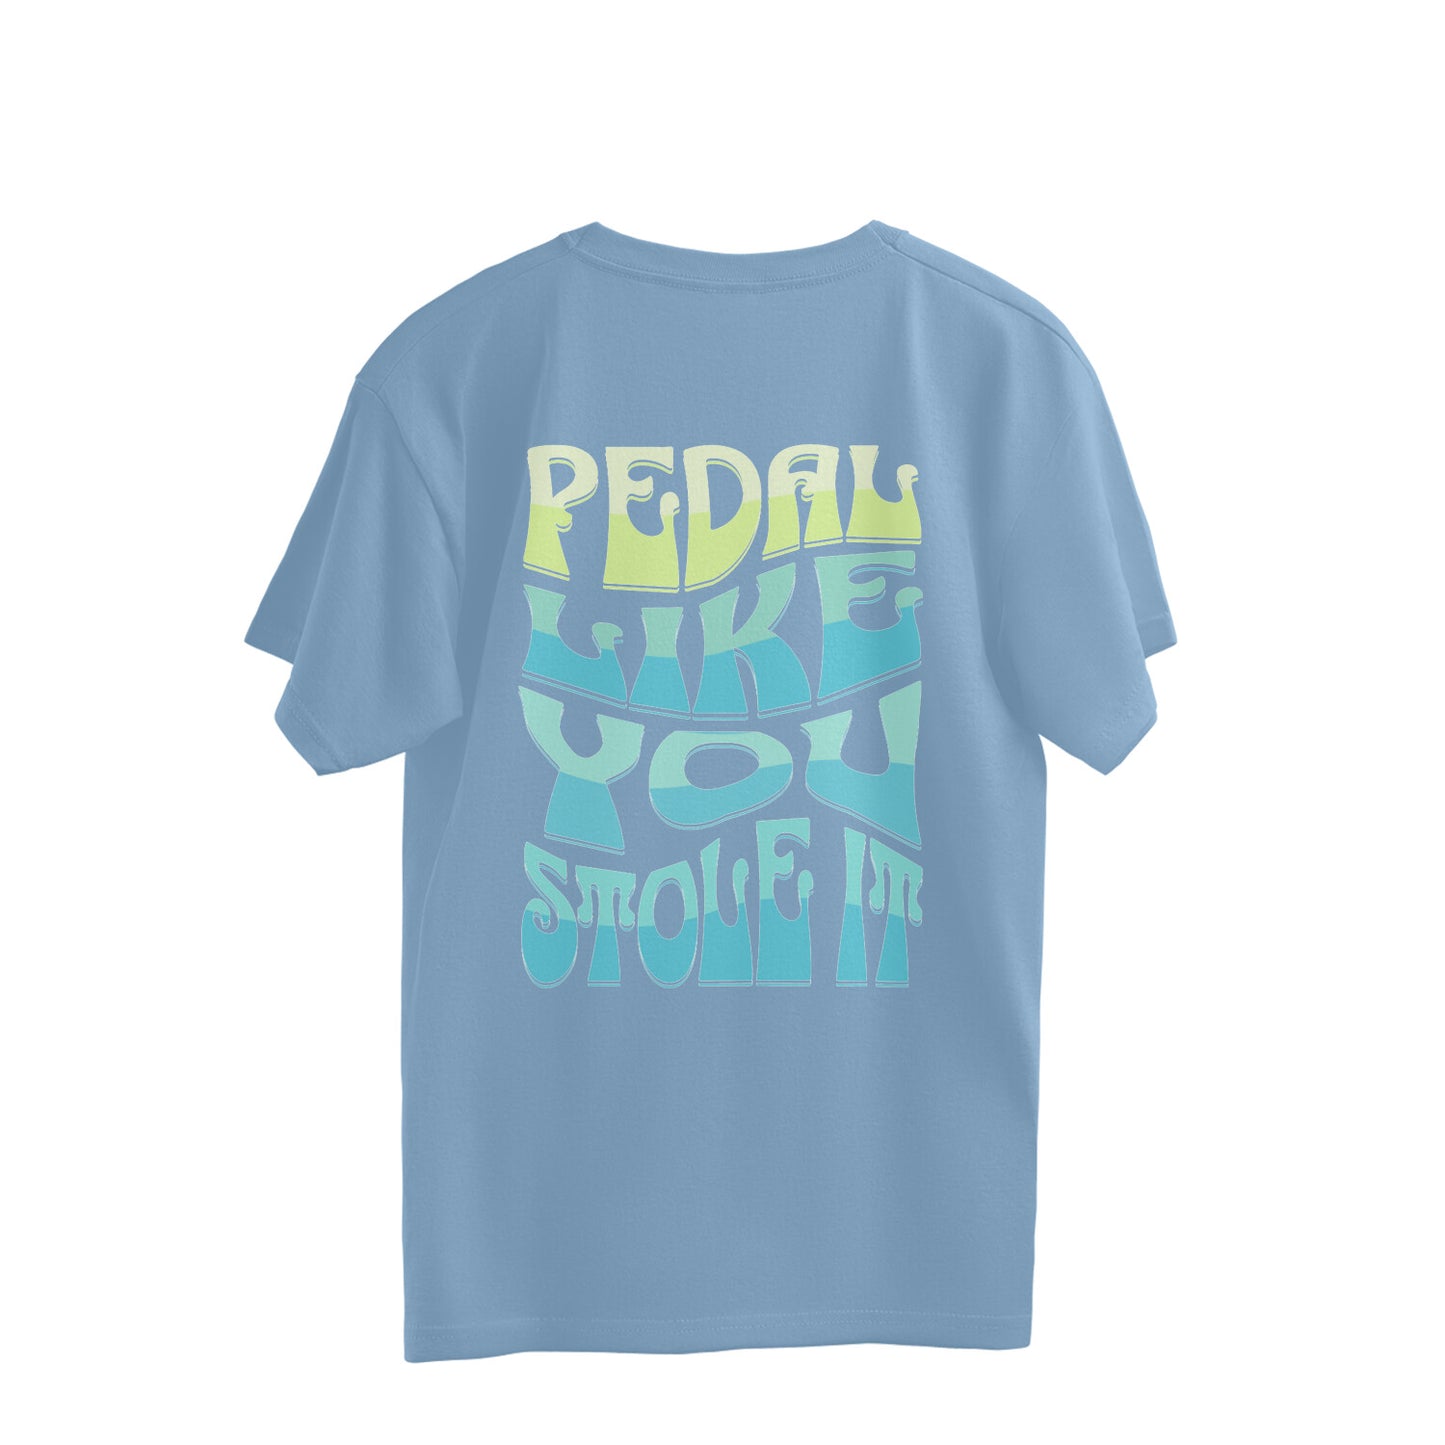 Pedal Like You Stole It Overhalf T-shirt